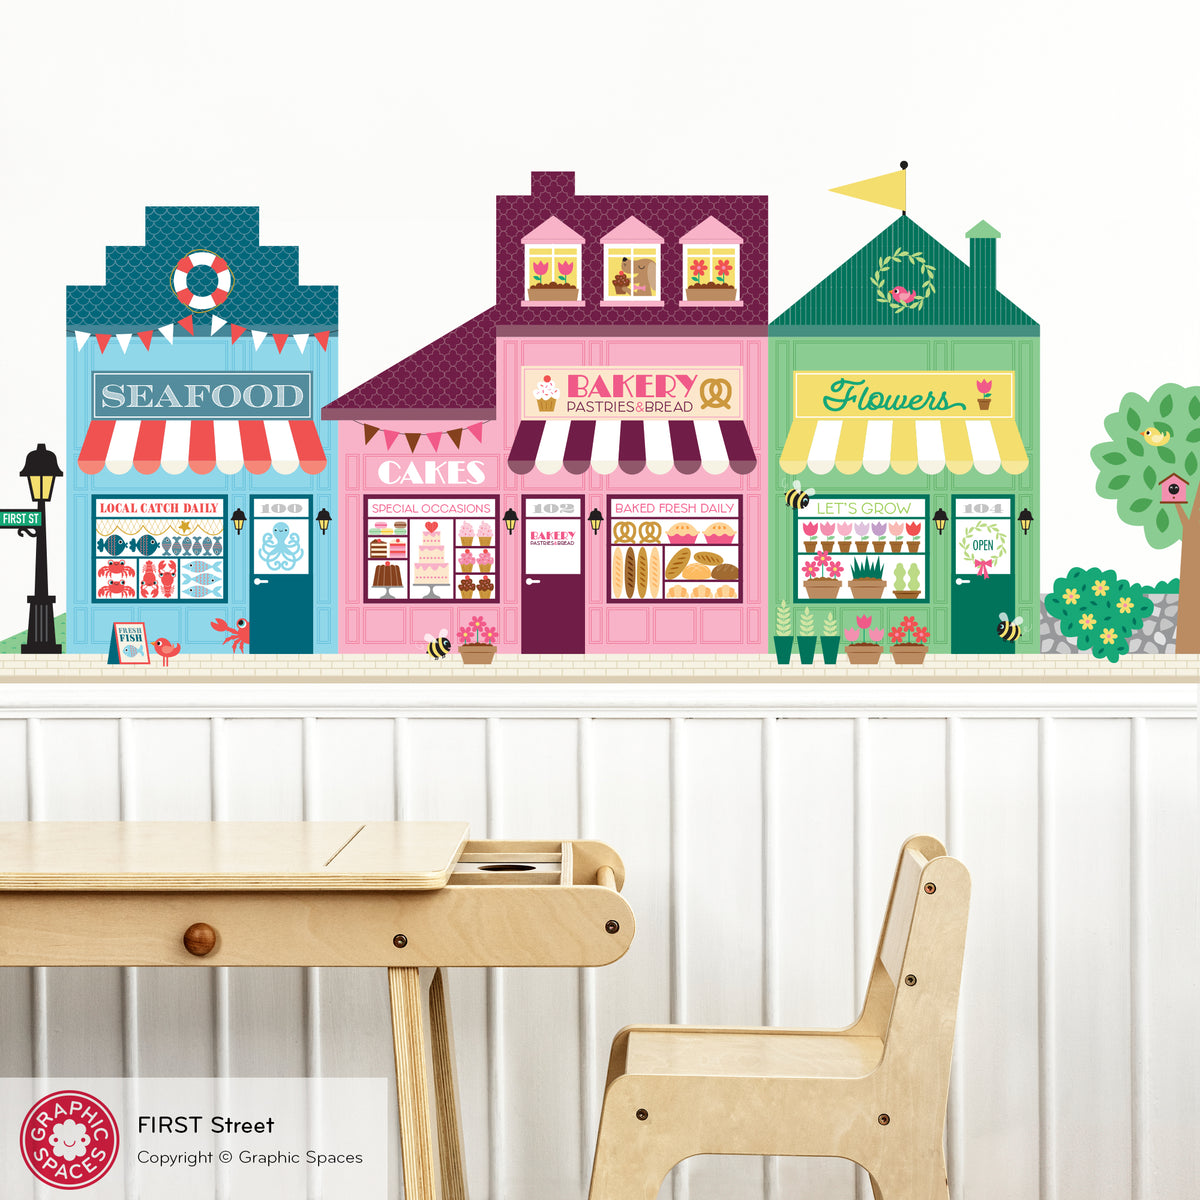 Happy Town Fabric Wall Decals - First Street (Seafood Market, Bakery, Flower Shop)